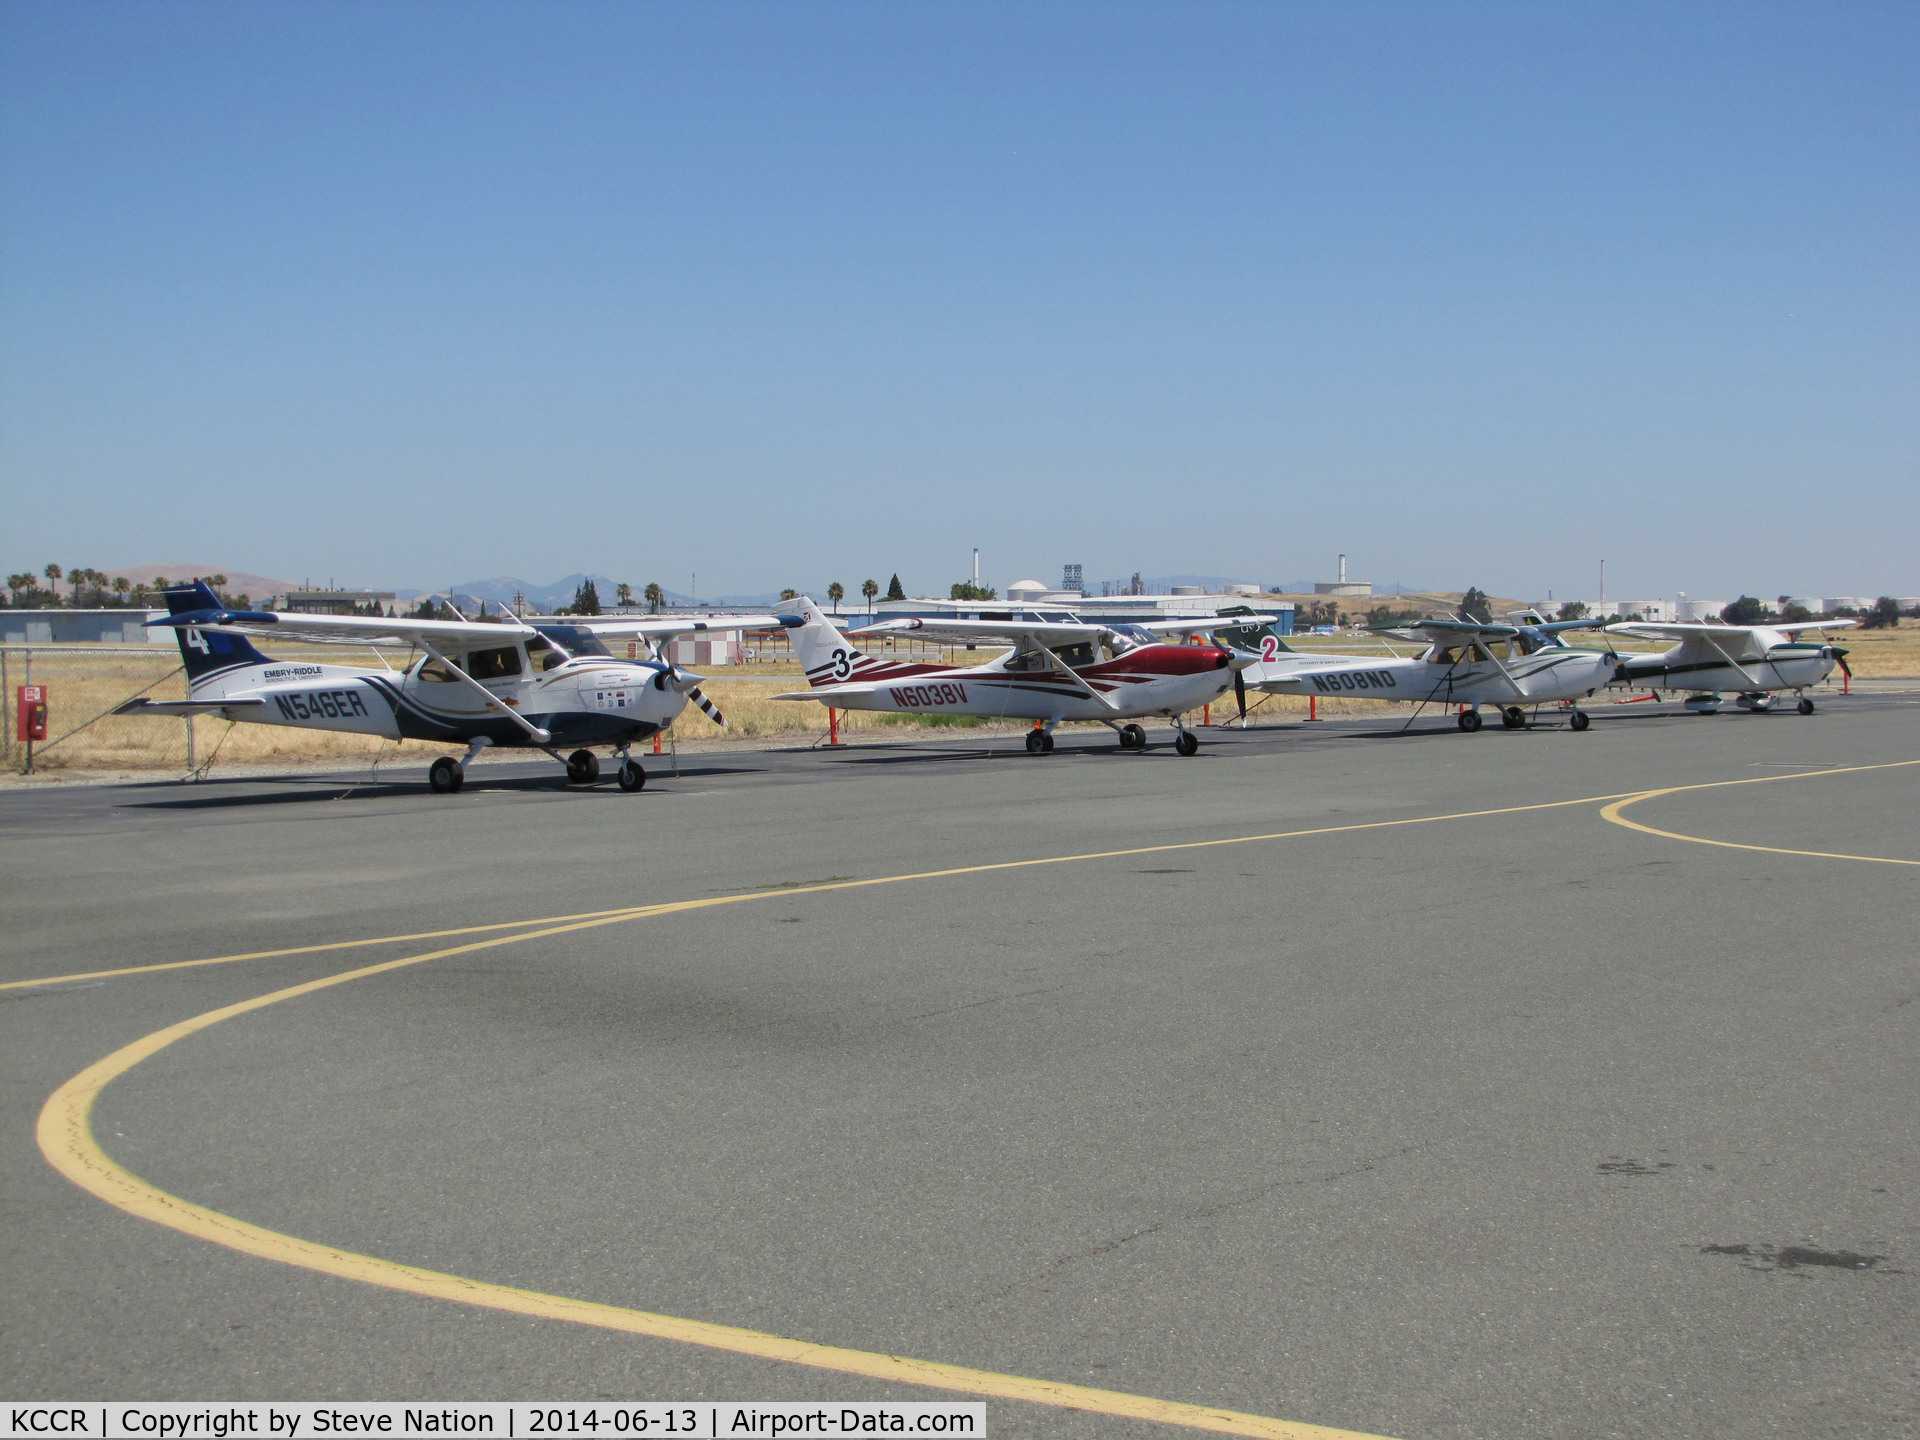 Buchanan Field Airport (CCR) - Another shot of the 2014 Air Race Classic flightline showing Embry-Riddle Prescott Cessna 172S N546ER #4, Cessna 182T N6038V #3, U of ND Cessna 172S N608ND #2 & Cessna 172M C-GWTJ #1